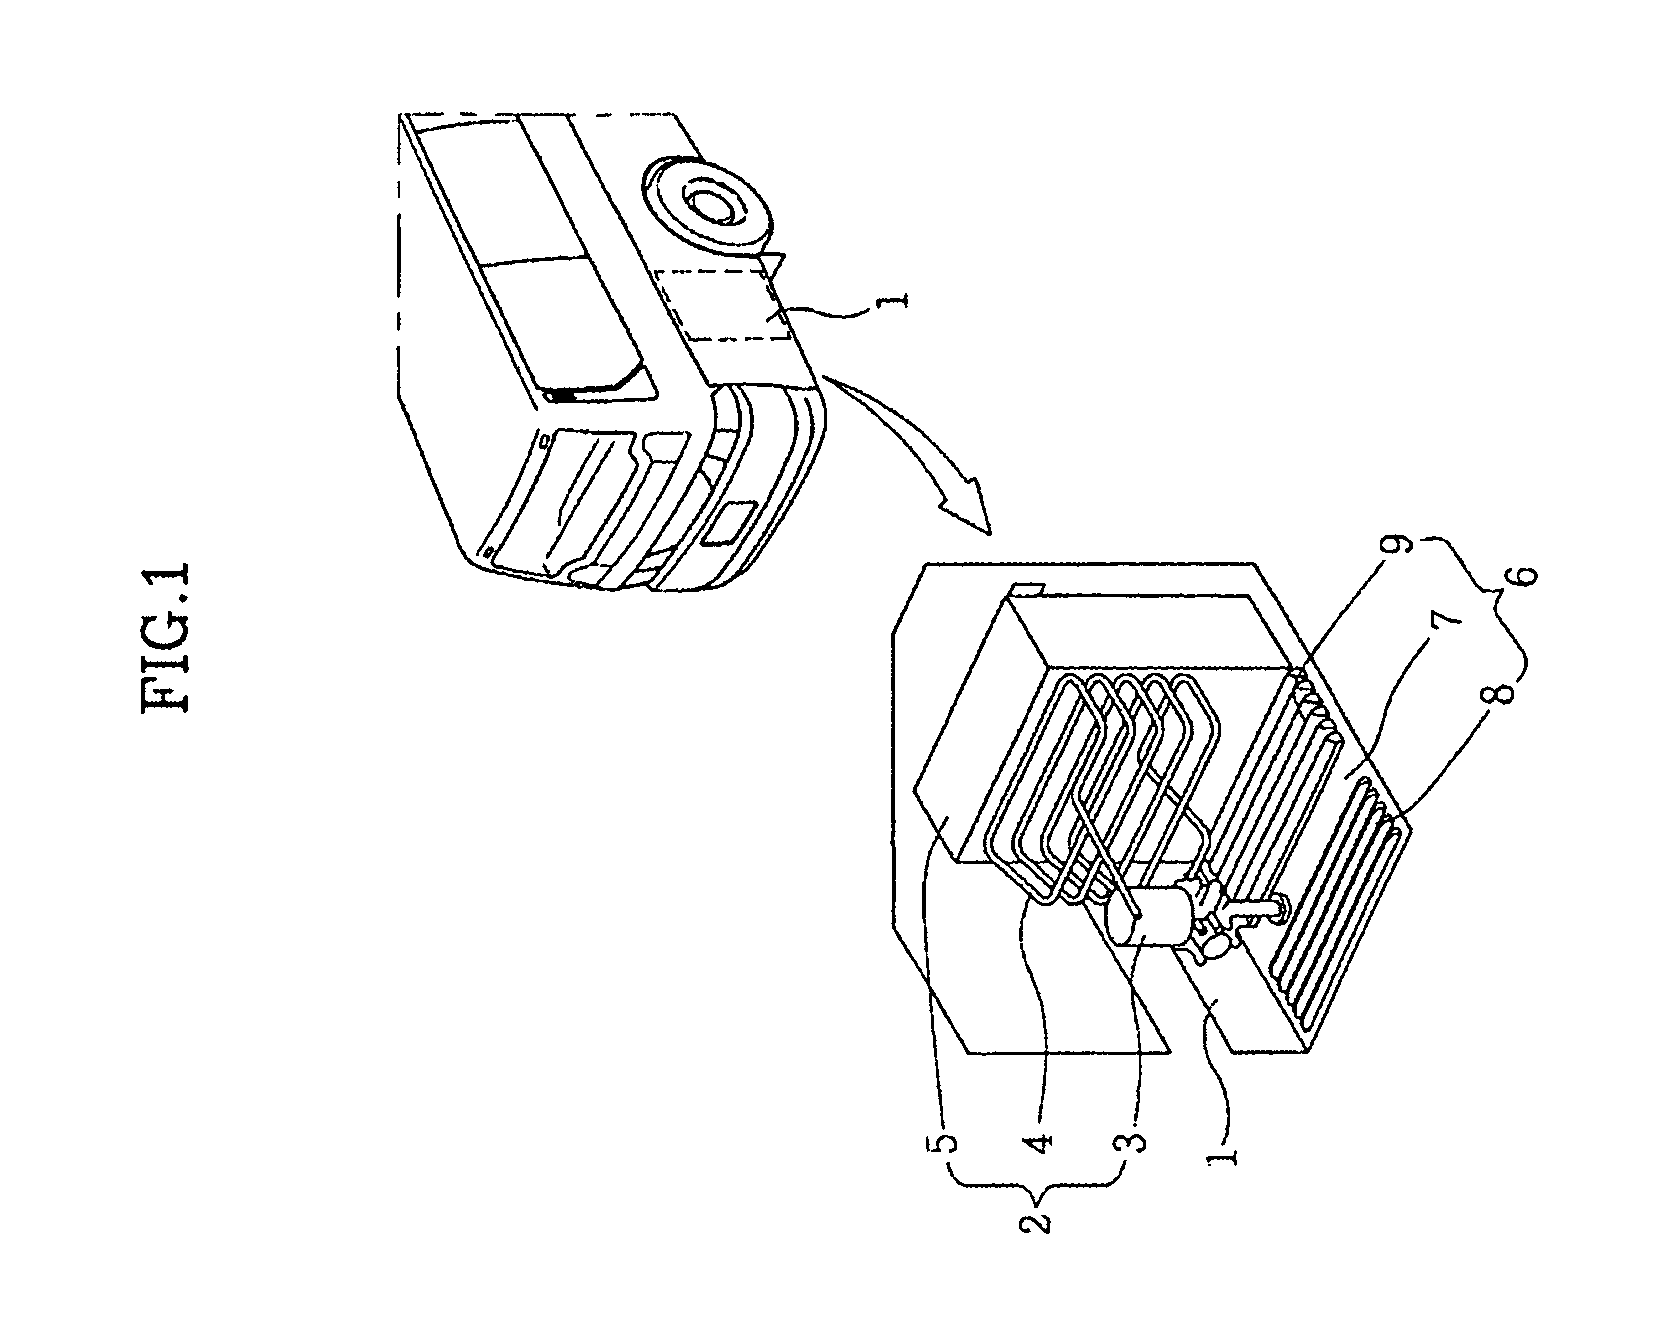 Outside air introduction grill for inducting natural convection in air influx room